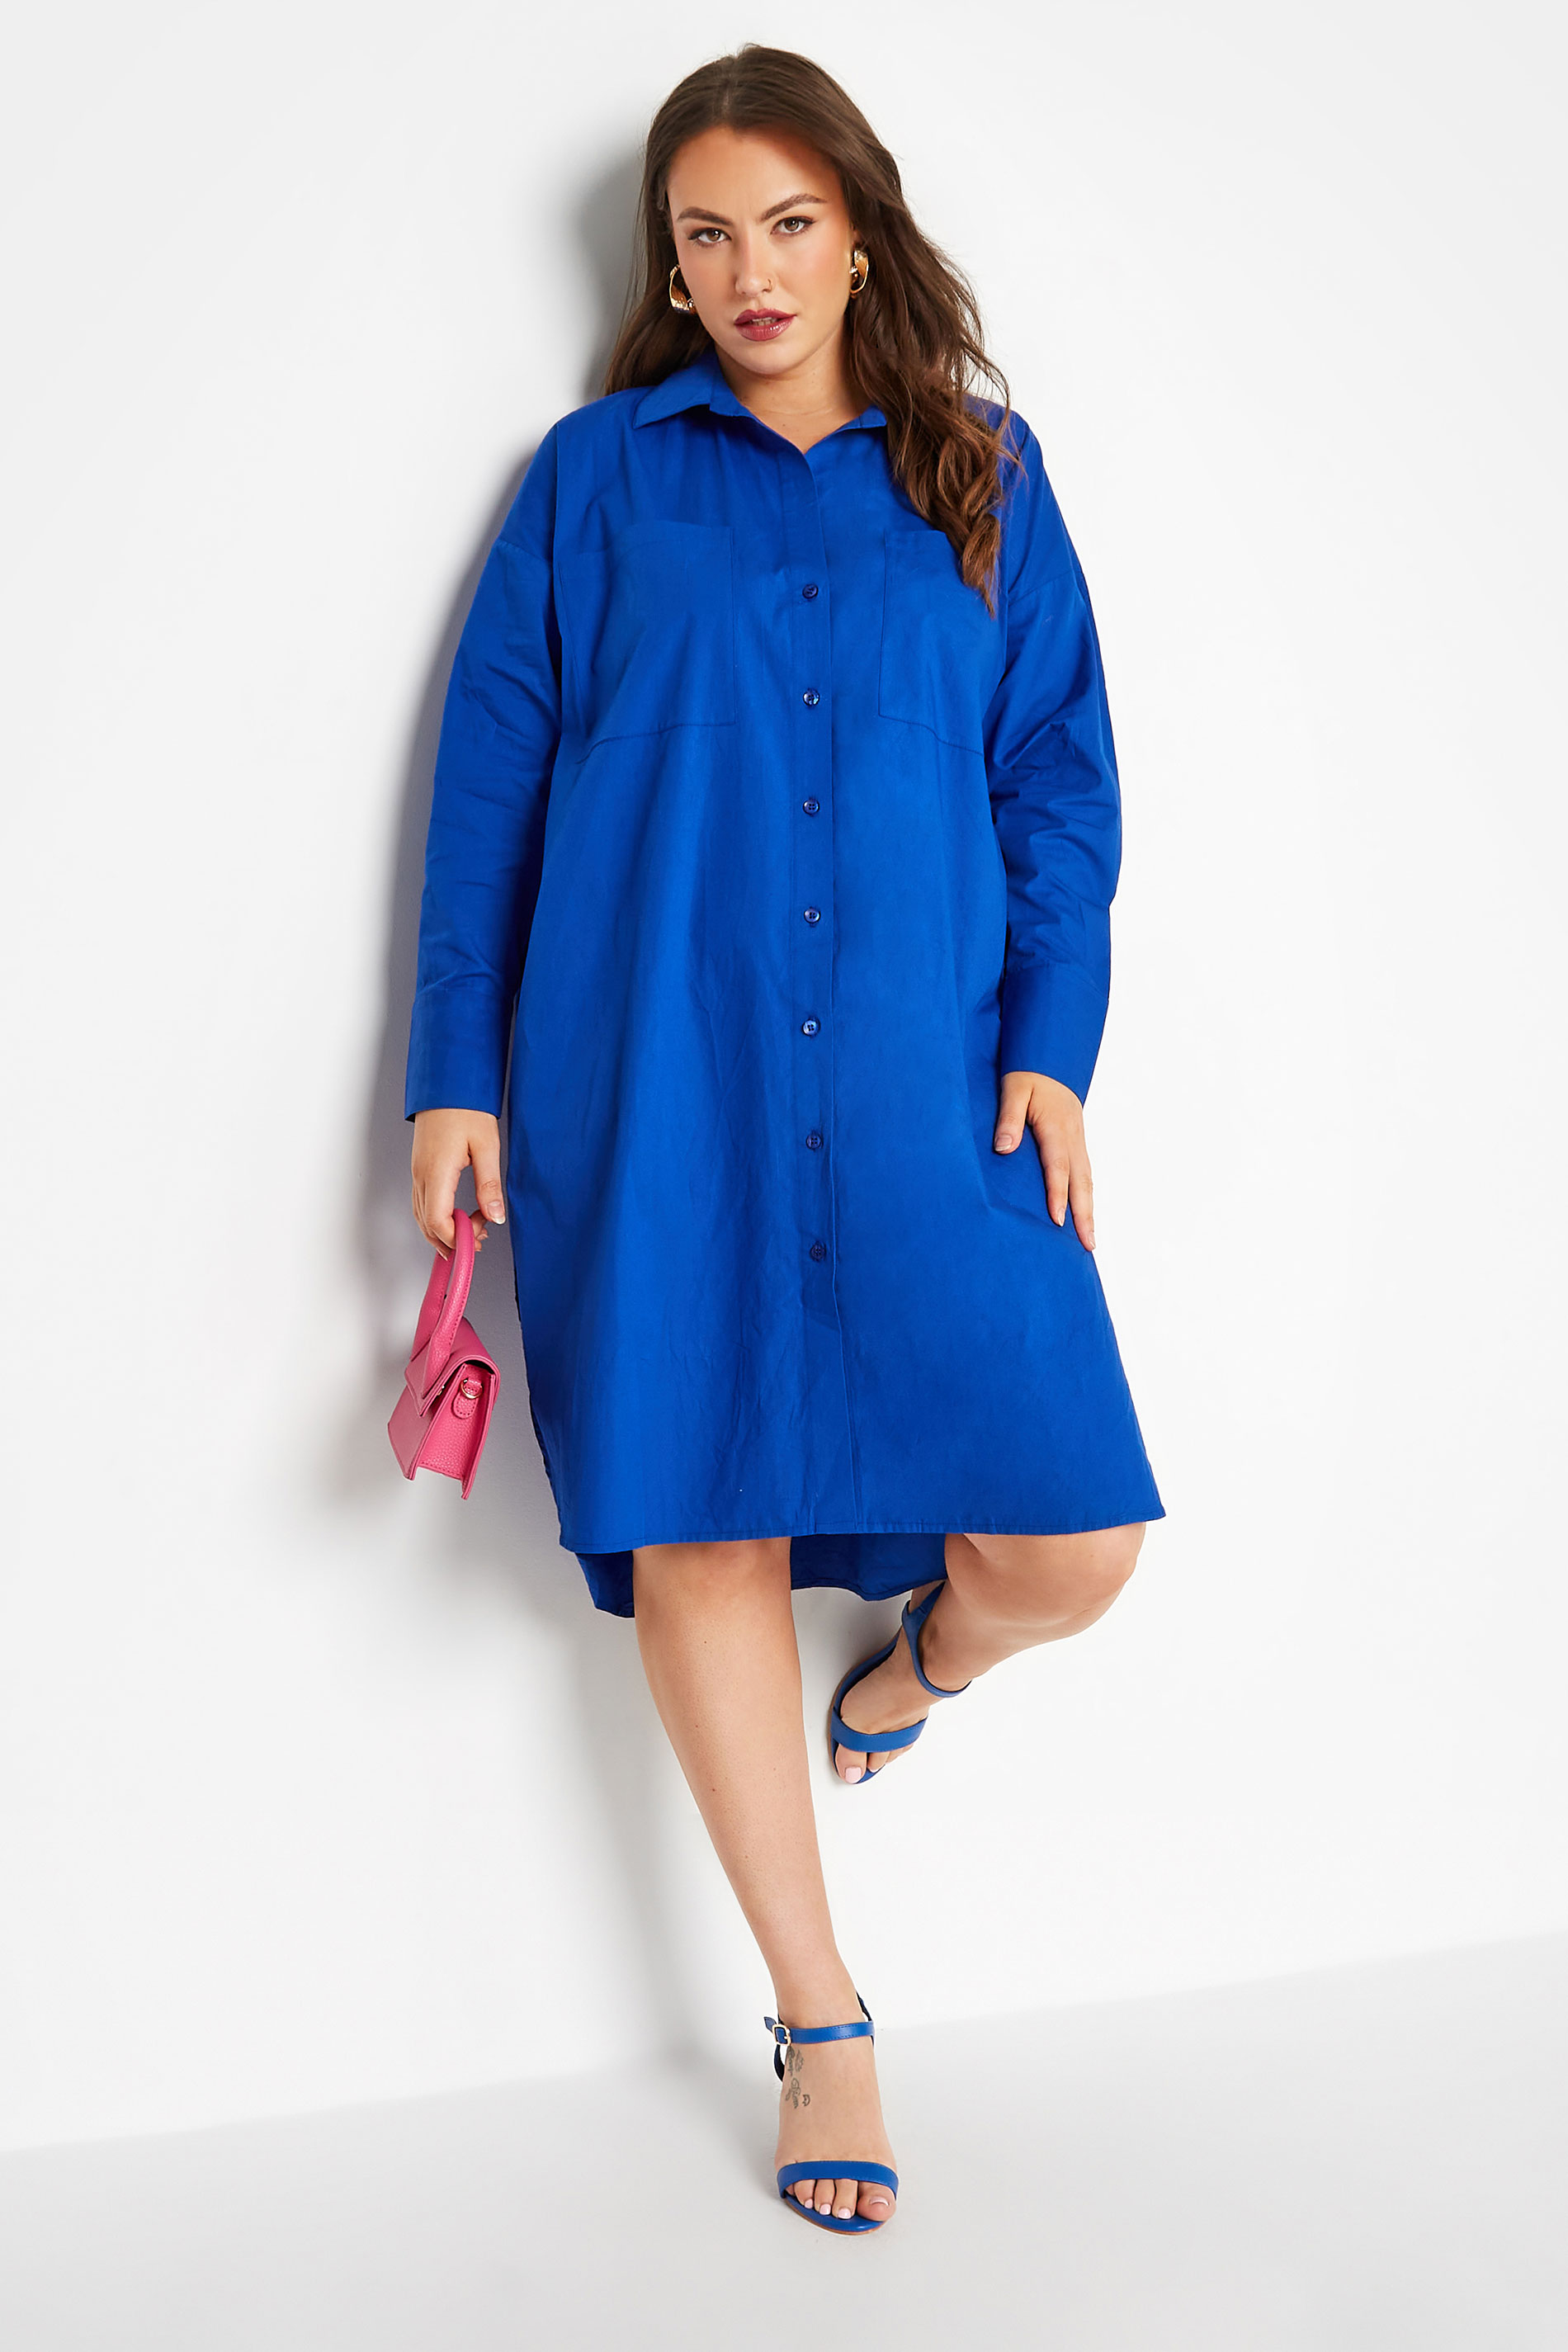 Robes Grande Taille Grande taille  Robes-Chemisiers | LIMITED COLLECTION - Robe-Chemisier Bleue Roi Manches Longues - XT78775